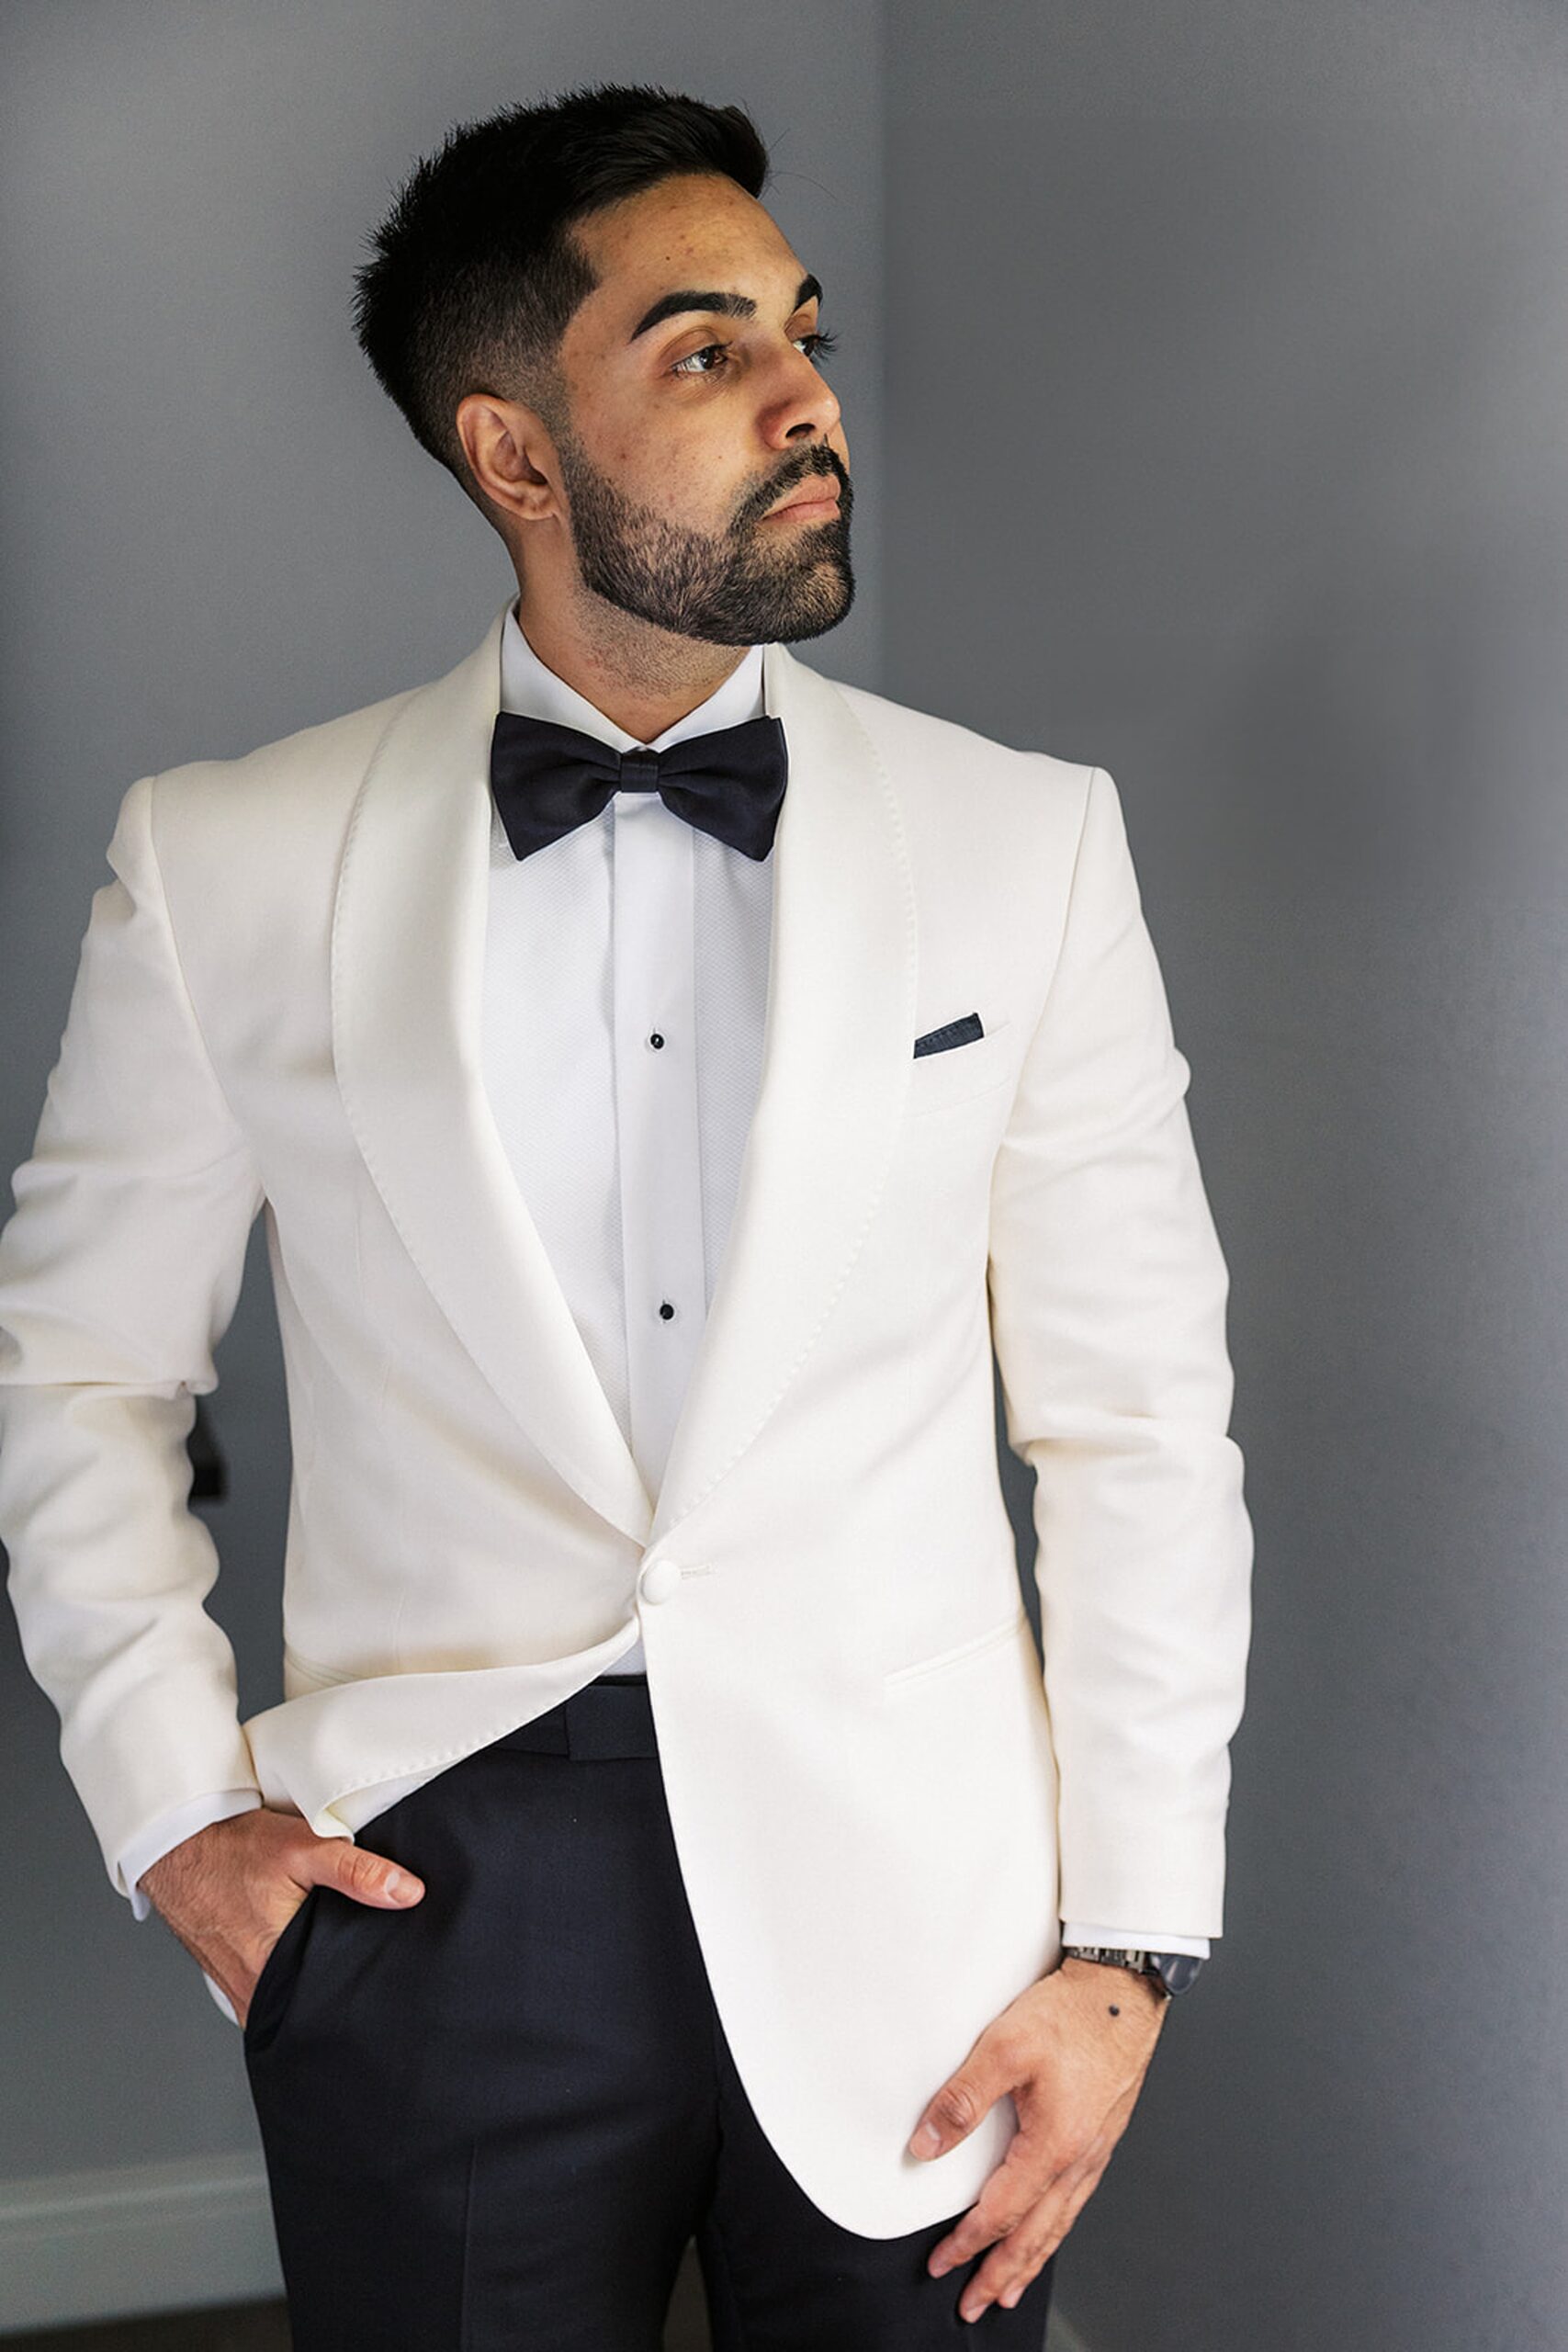 A groom in a white tuxedo jacket and black pants gazes out a window